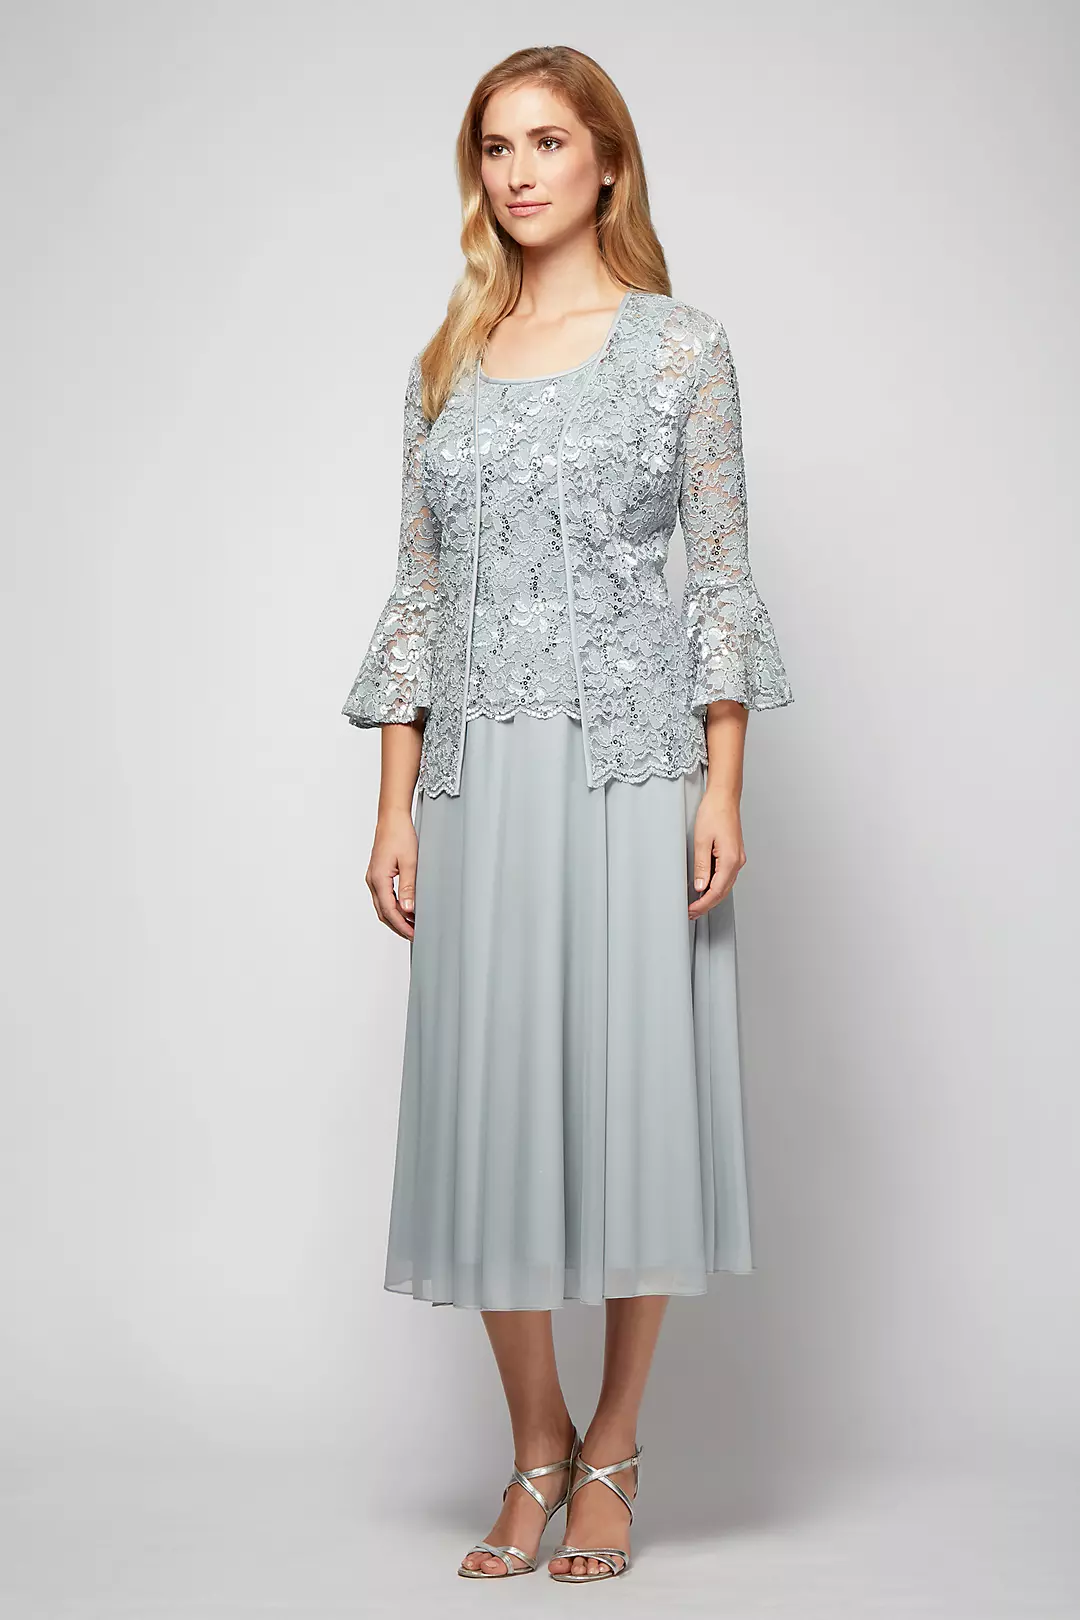 Bell-Sleeve Lace and Mesh Tea-Length Jacket Dress Image